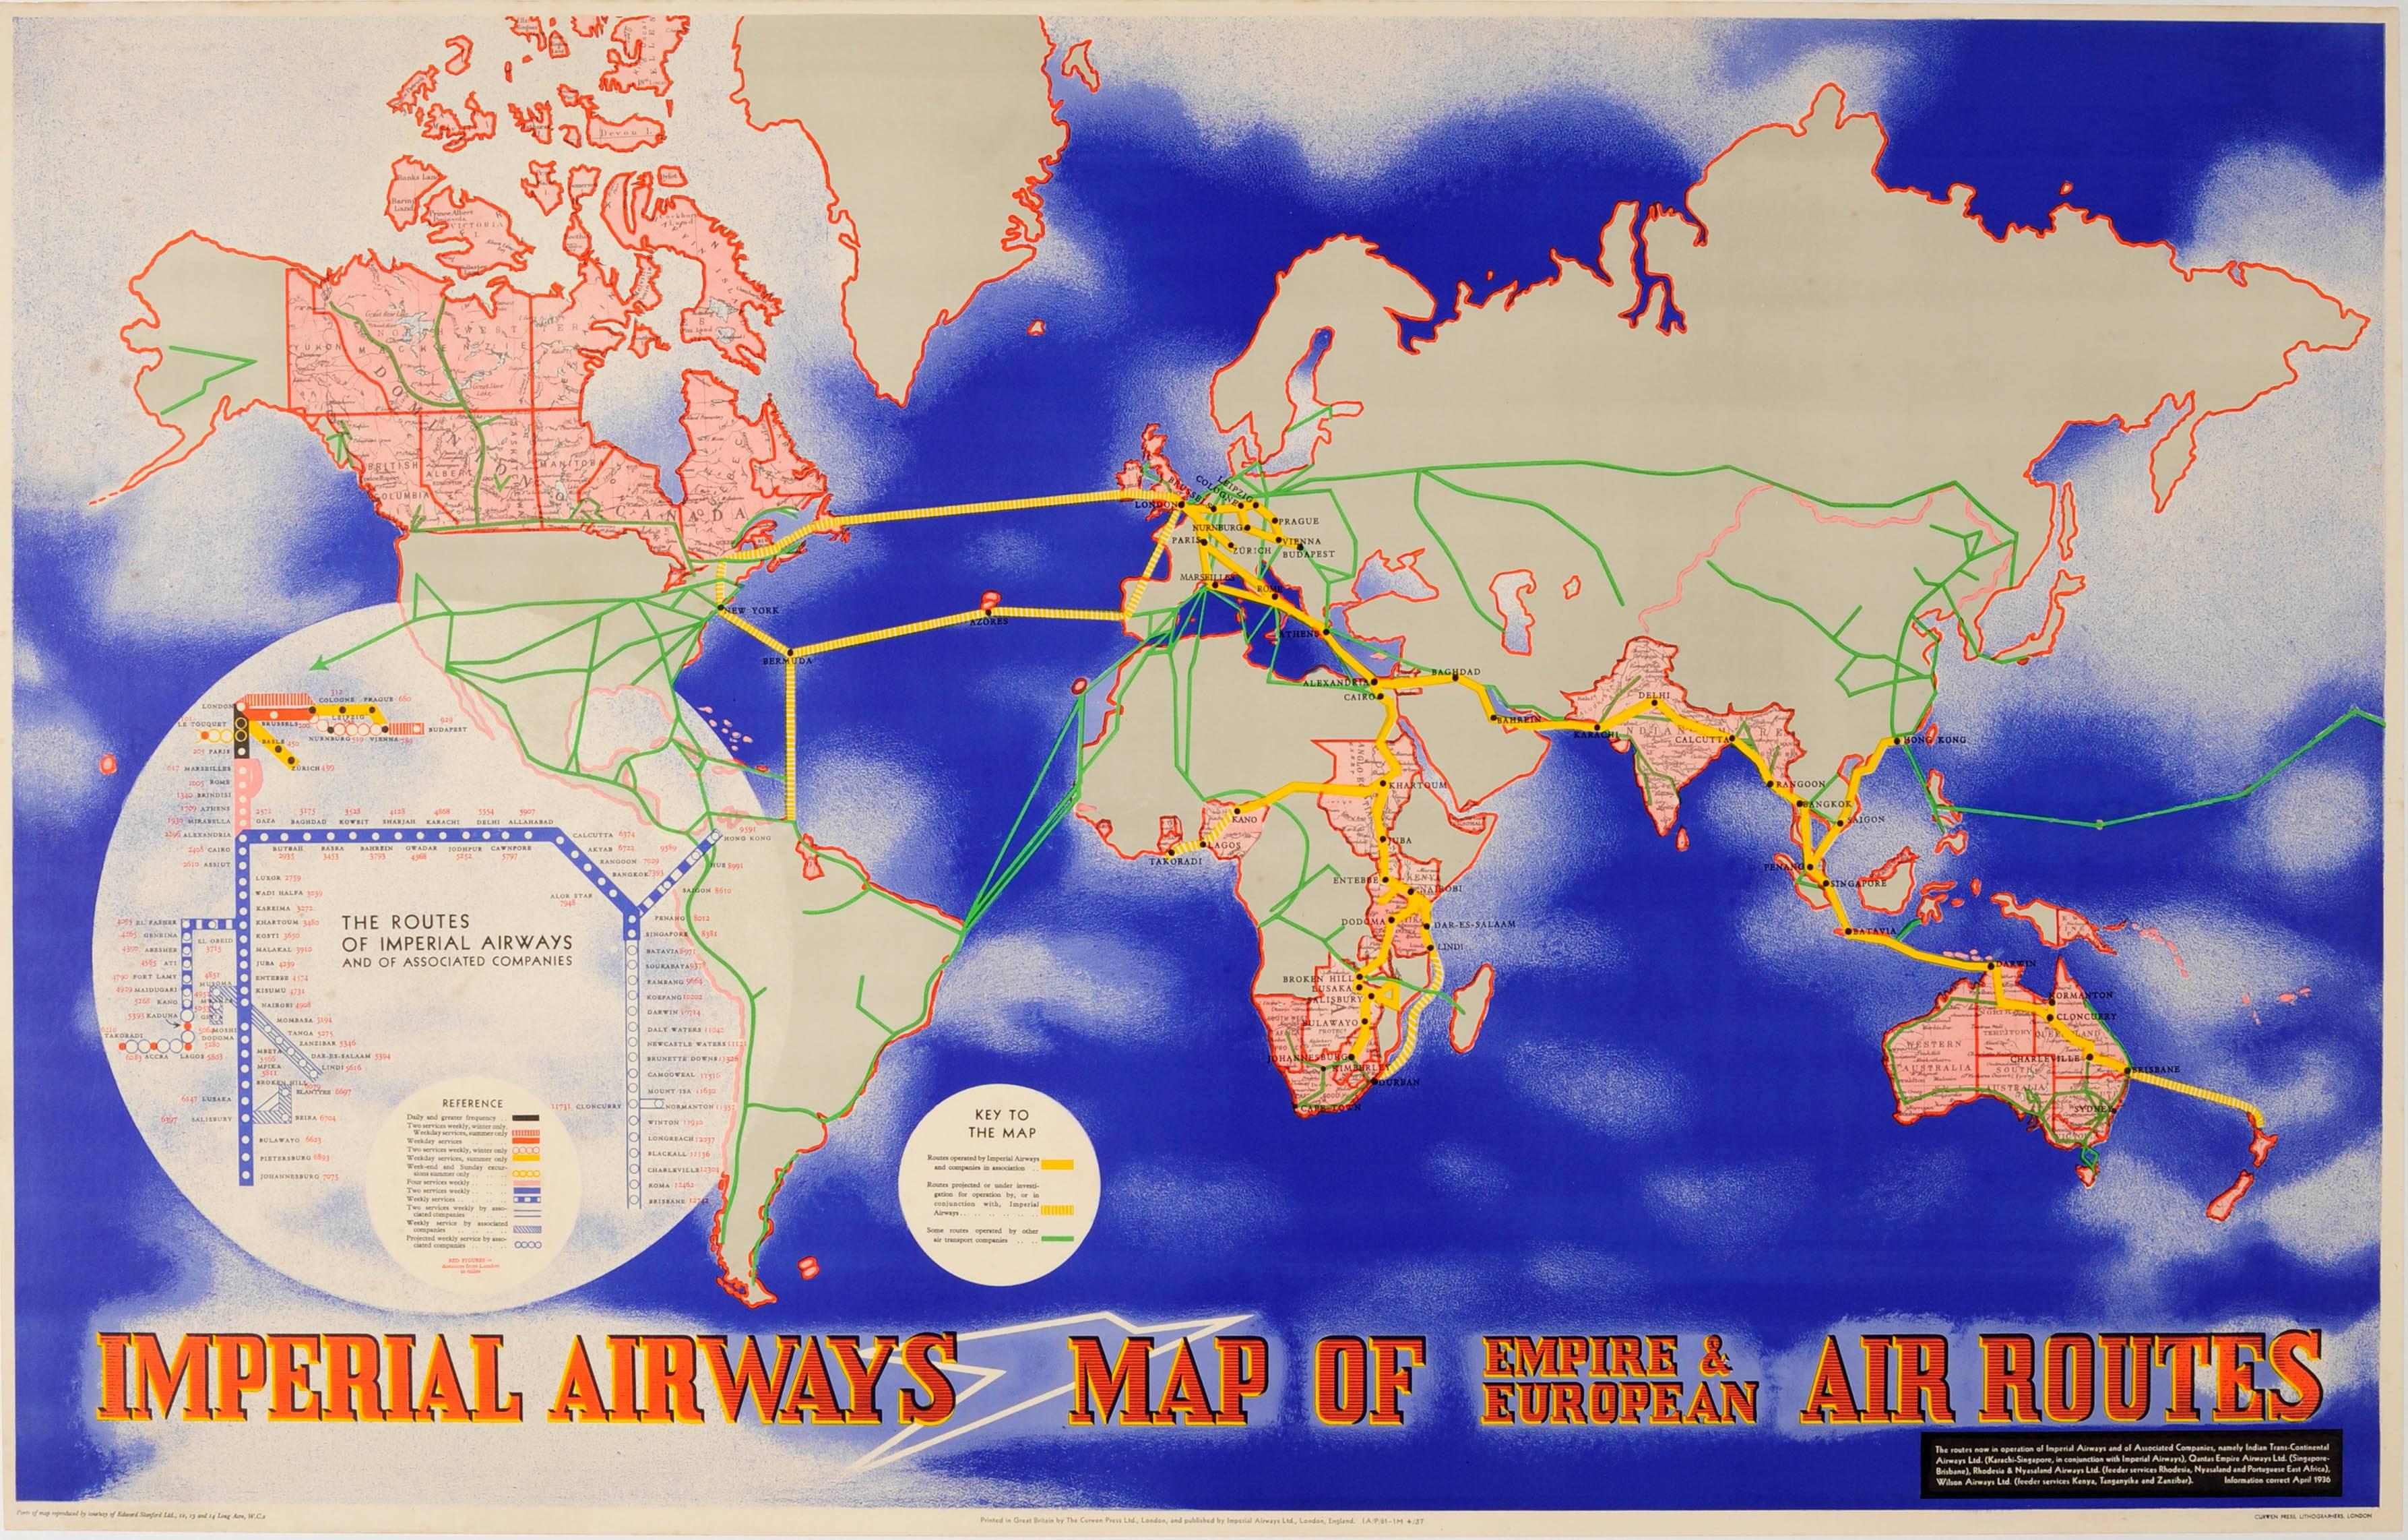 László Moholy-Nagy Print - Original Vintage Imperial Airways Poster - Map Of Empire And European Air Routes